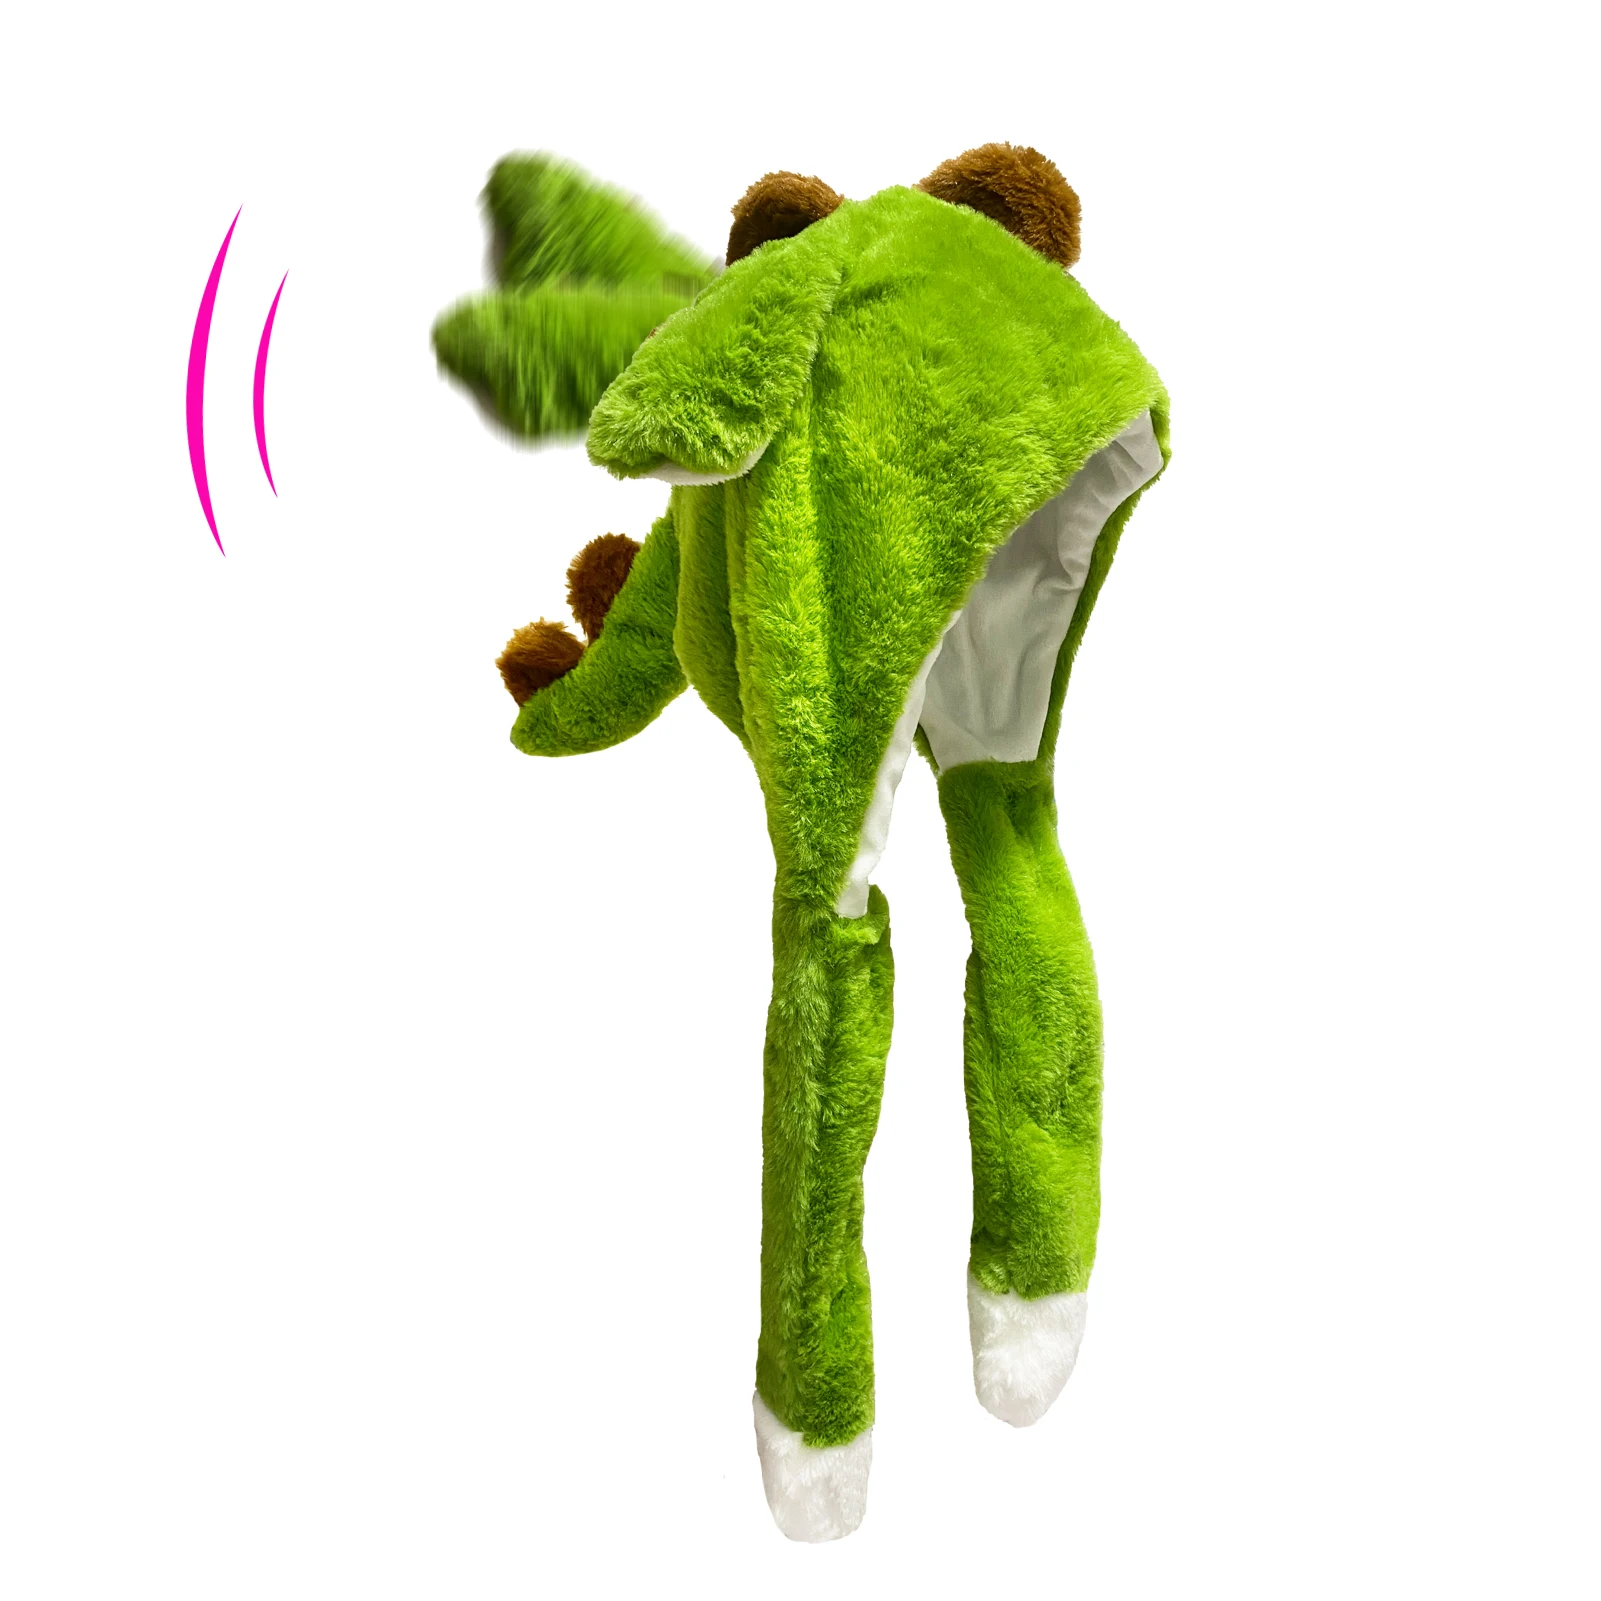 Dinosaur Ear Move Hat Plush Animal Moving Ear Hat Halloween Costume Winter Cap Elk Popup Ears Cap Christmas Funny Jumping Up Hat anime cartoon link hat cosplay plush hat costume party green plush hat cap toy christmas gifts prop